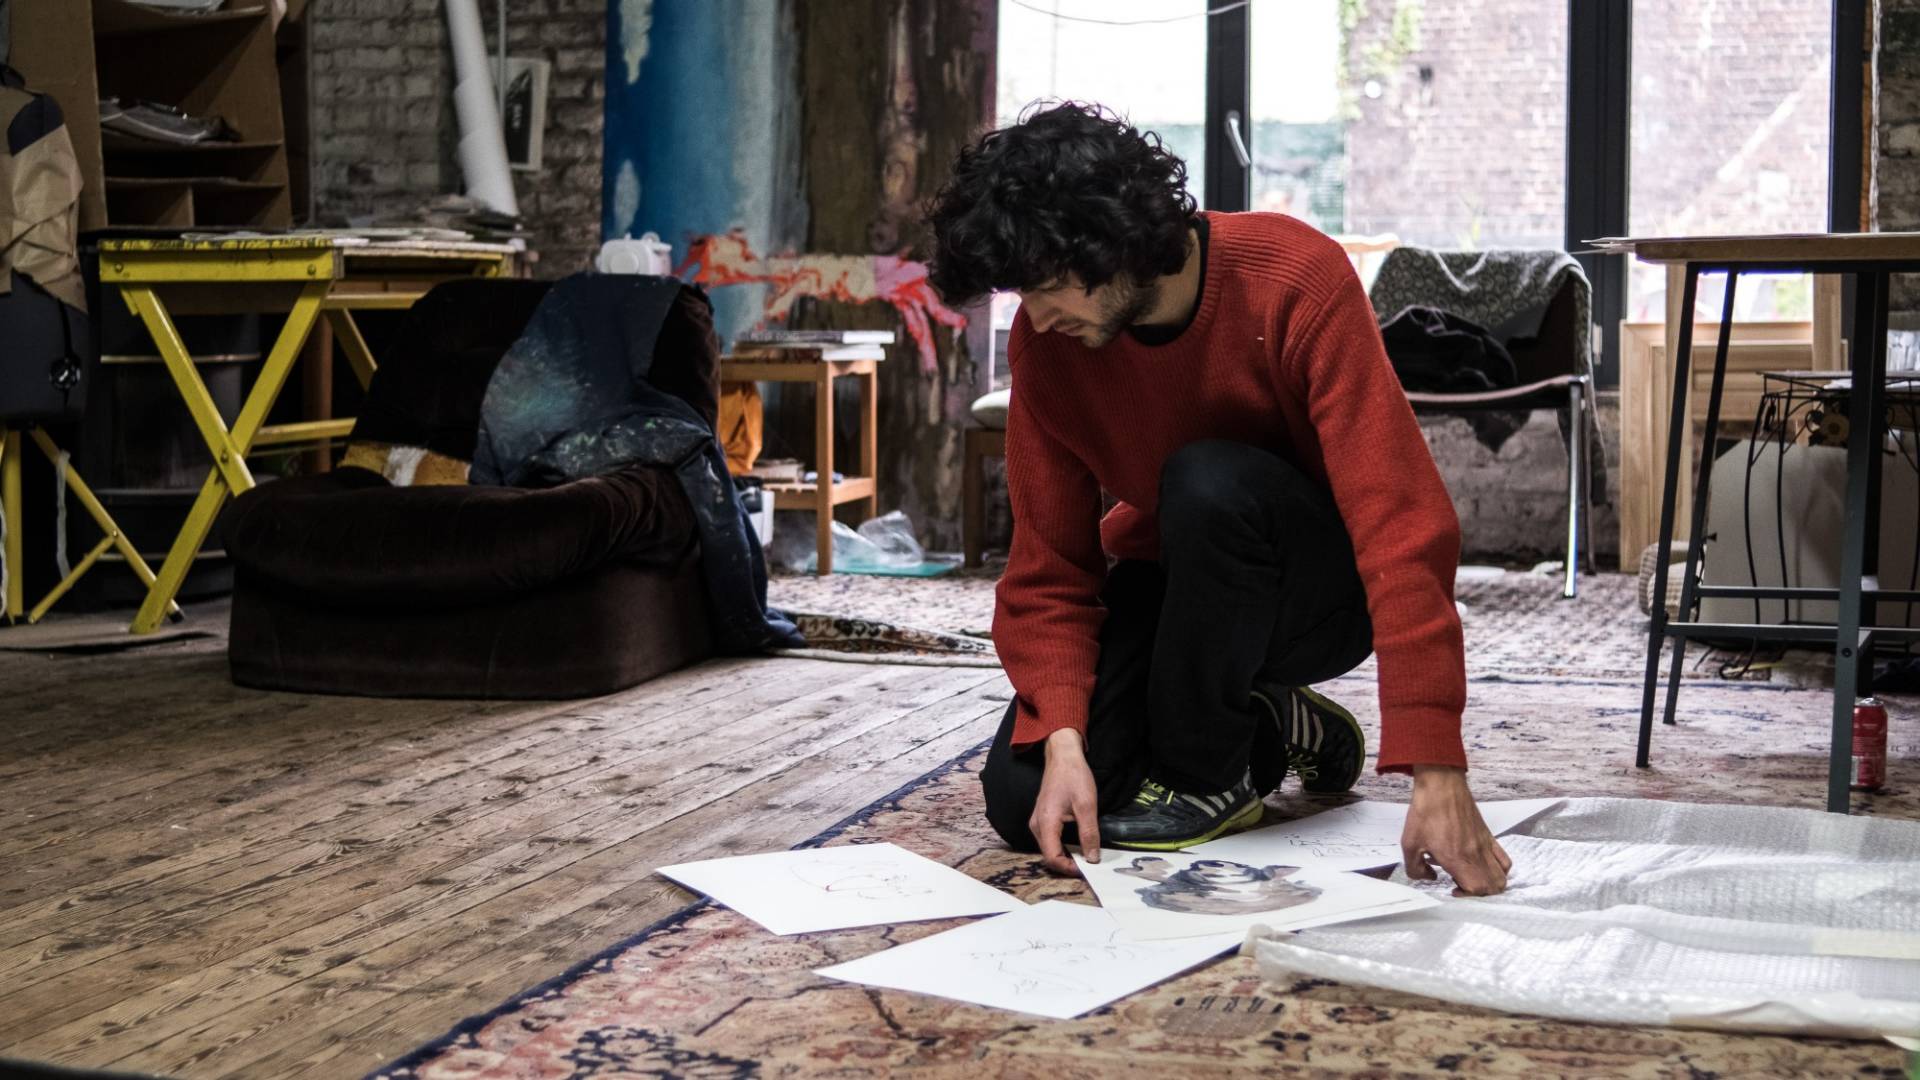 Andriu Deplazes kneels on the floor of his studio, sorting and viewing sketches which he has drawn in ink on white sheets of paper.